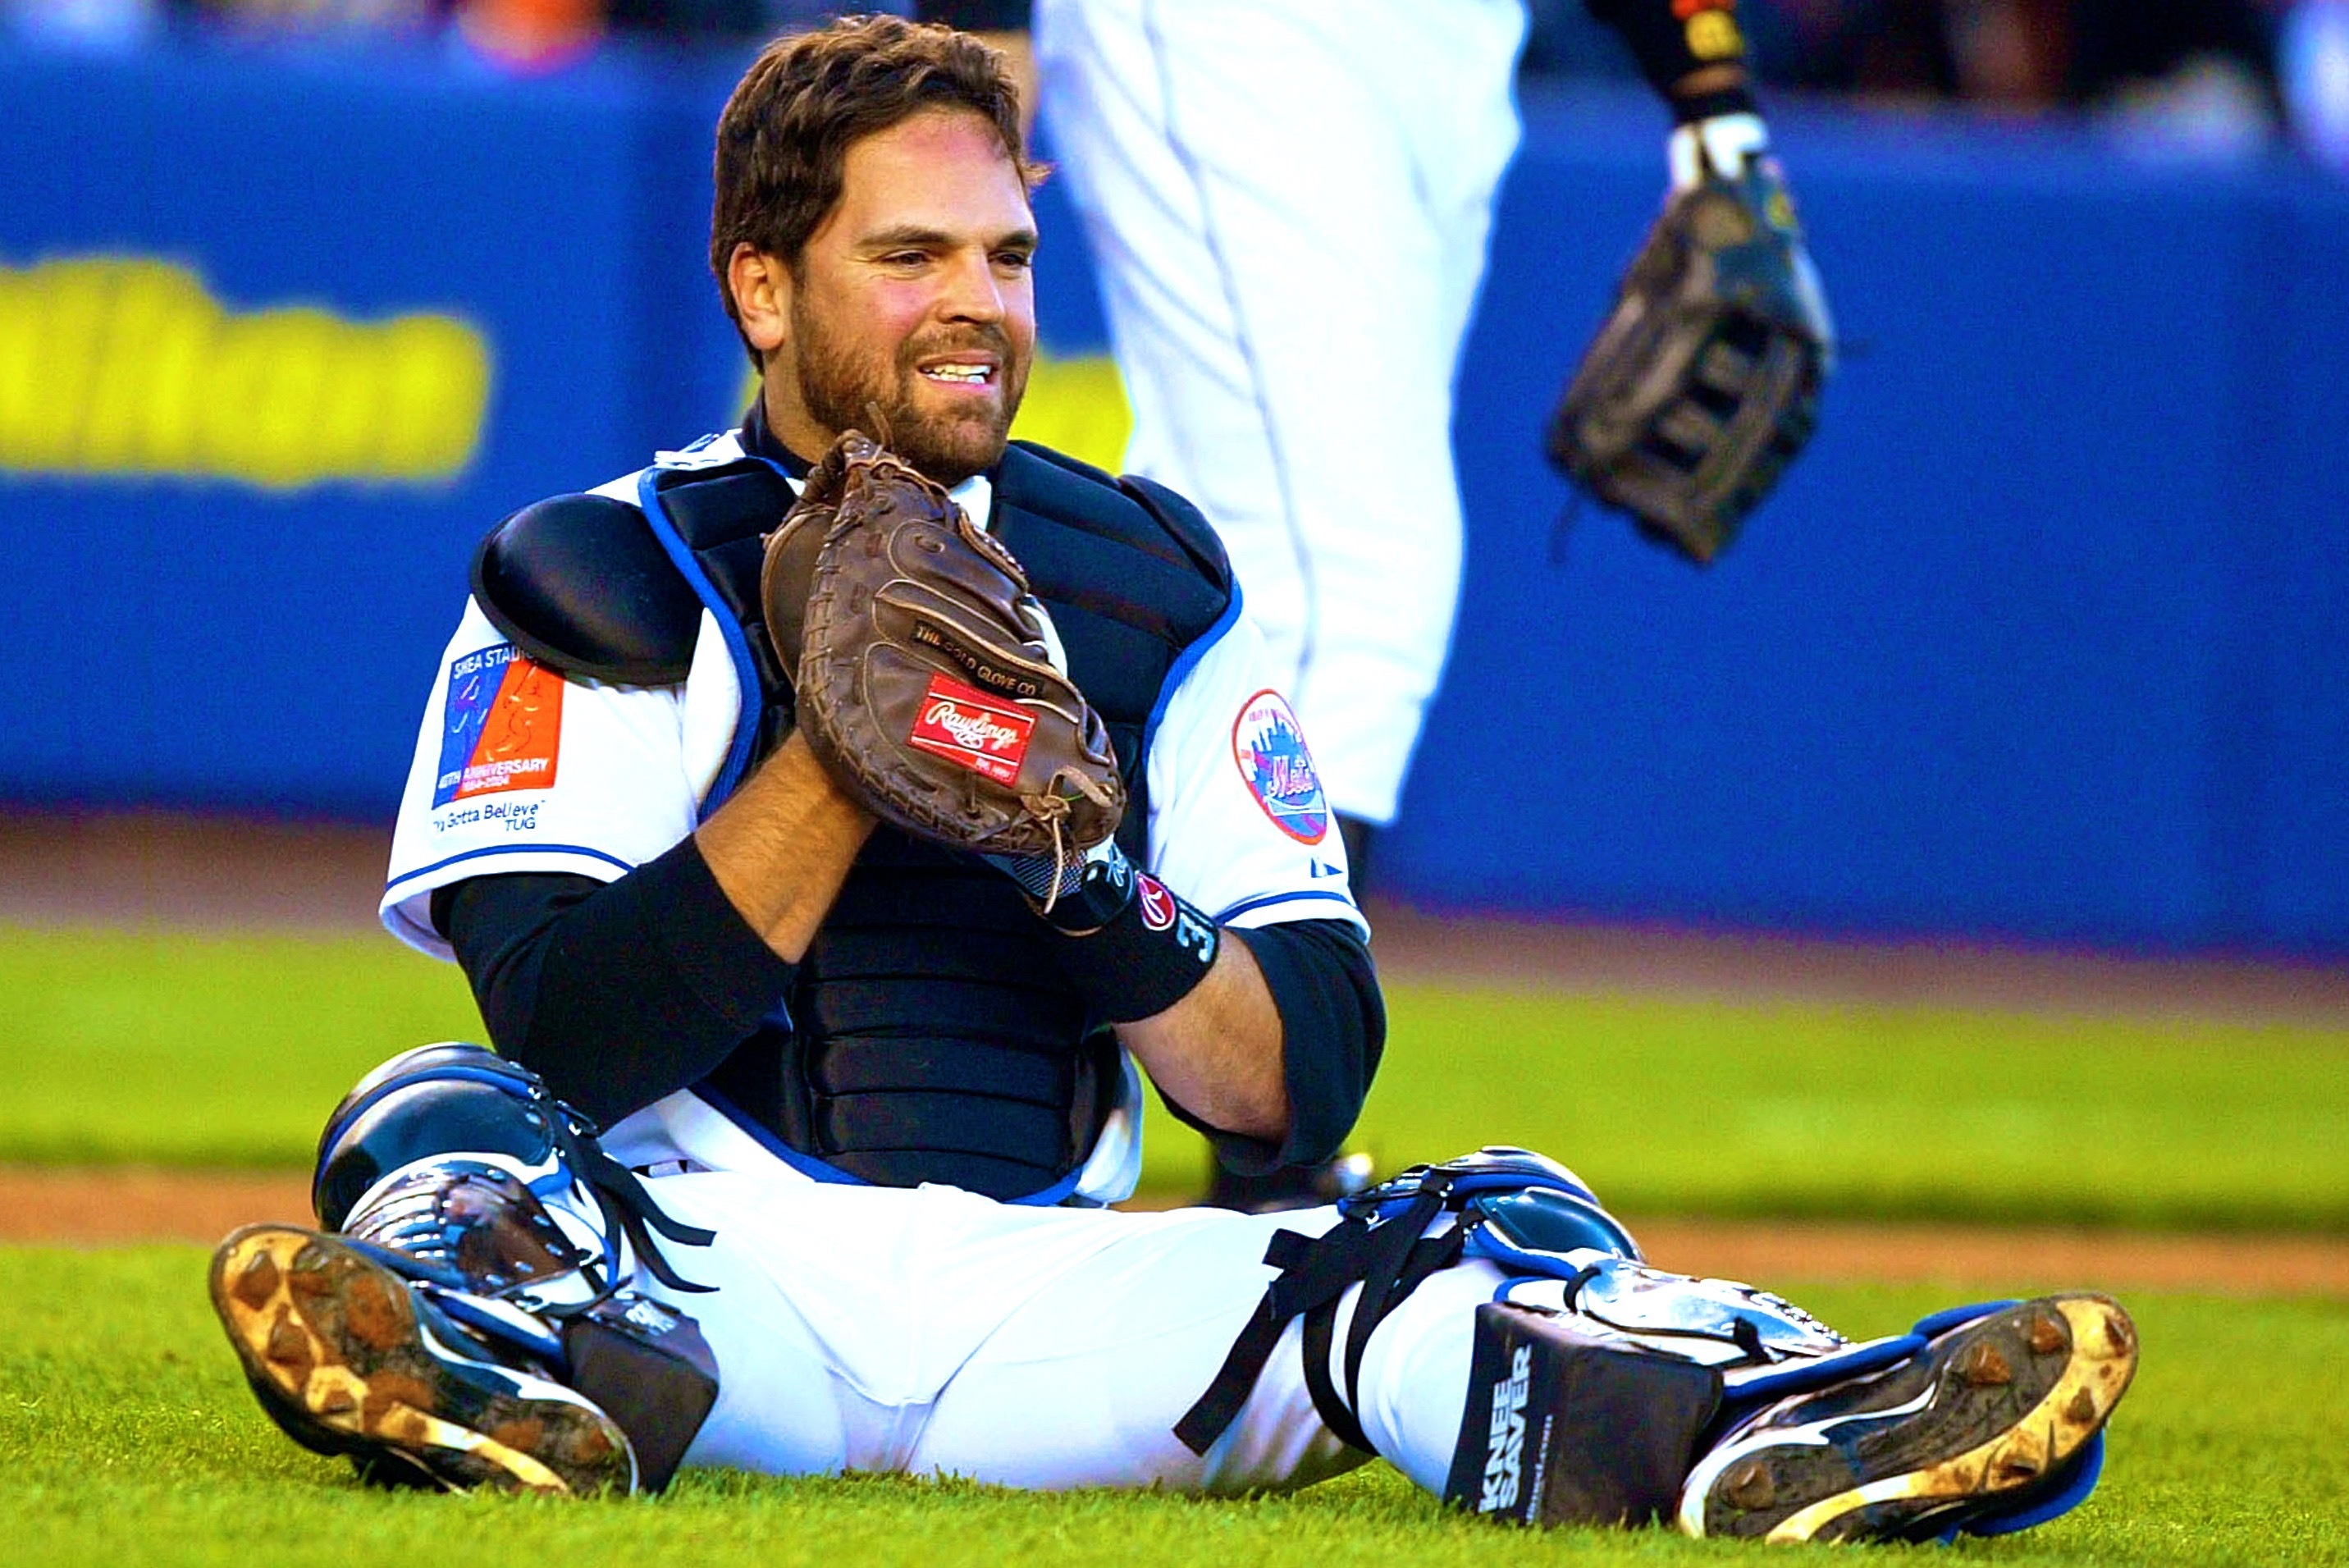 Former Dodgers Catcher Mike Piazza Enters the Hall of Fame